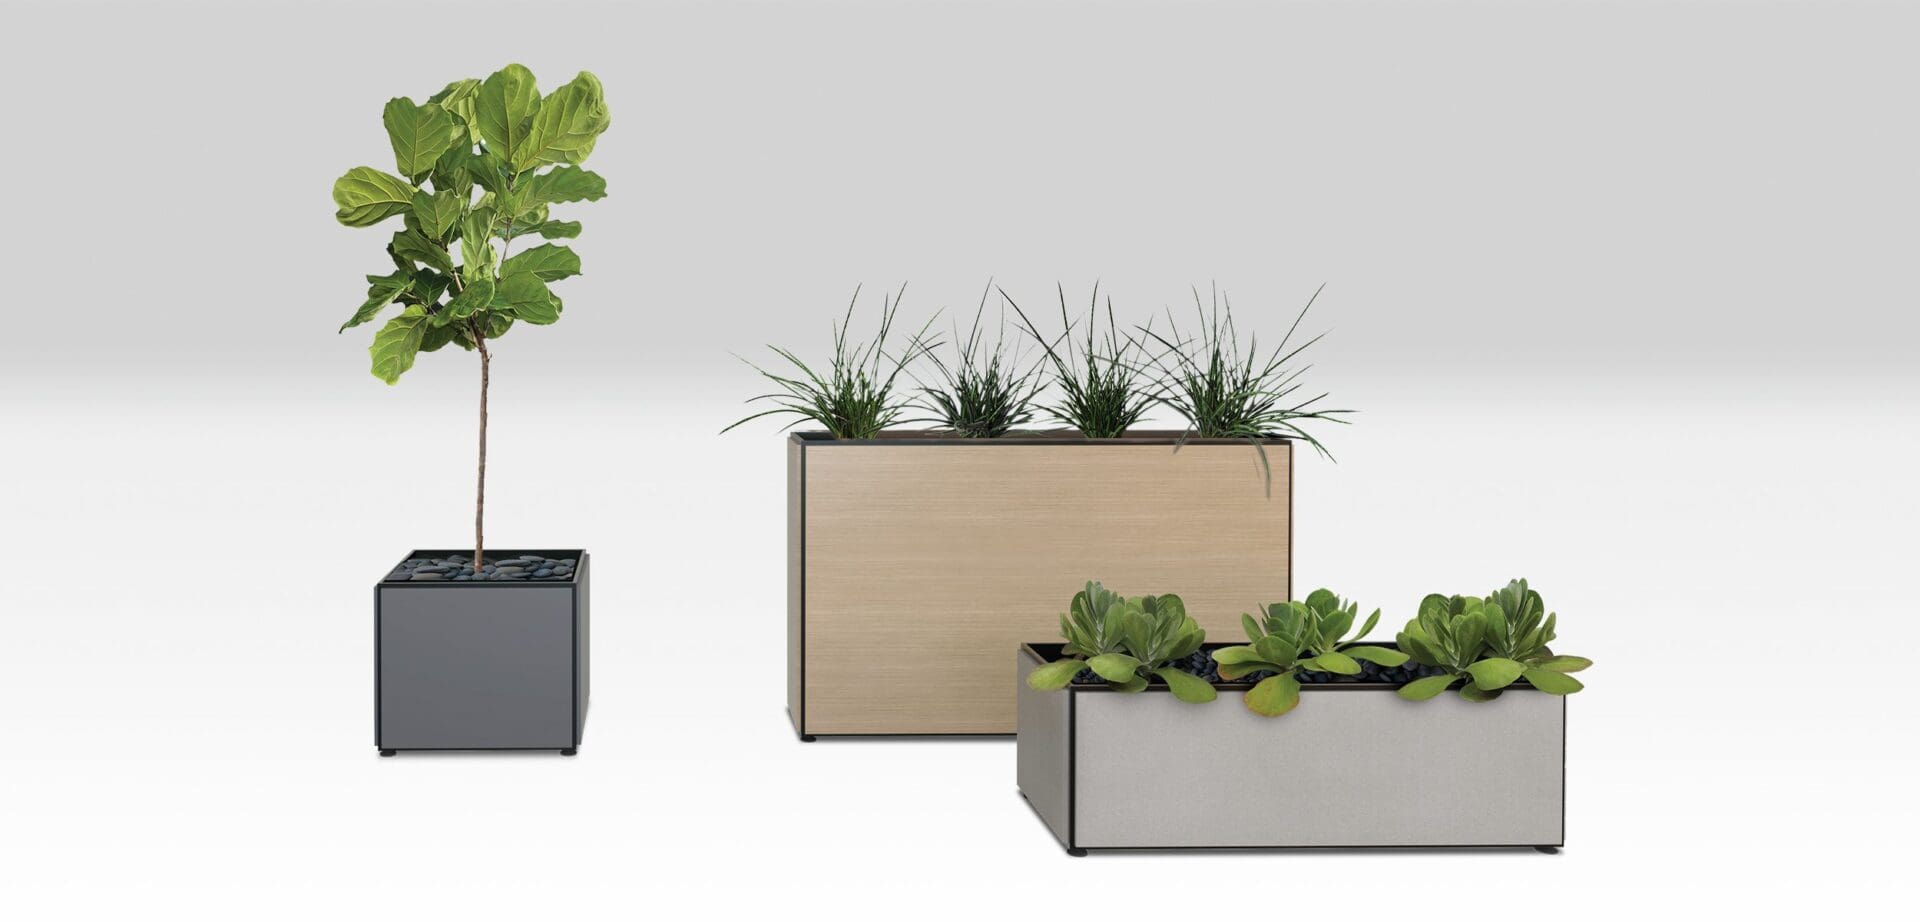 A group of three planters with plants in them.